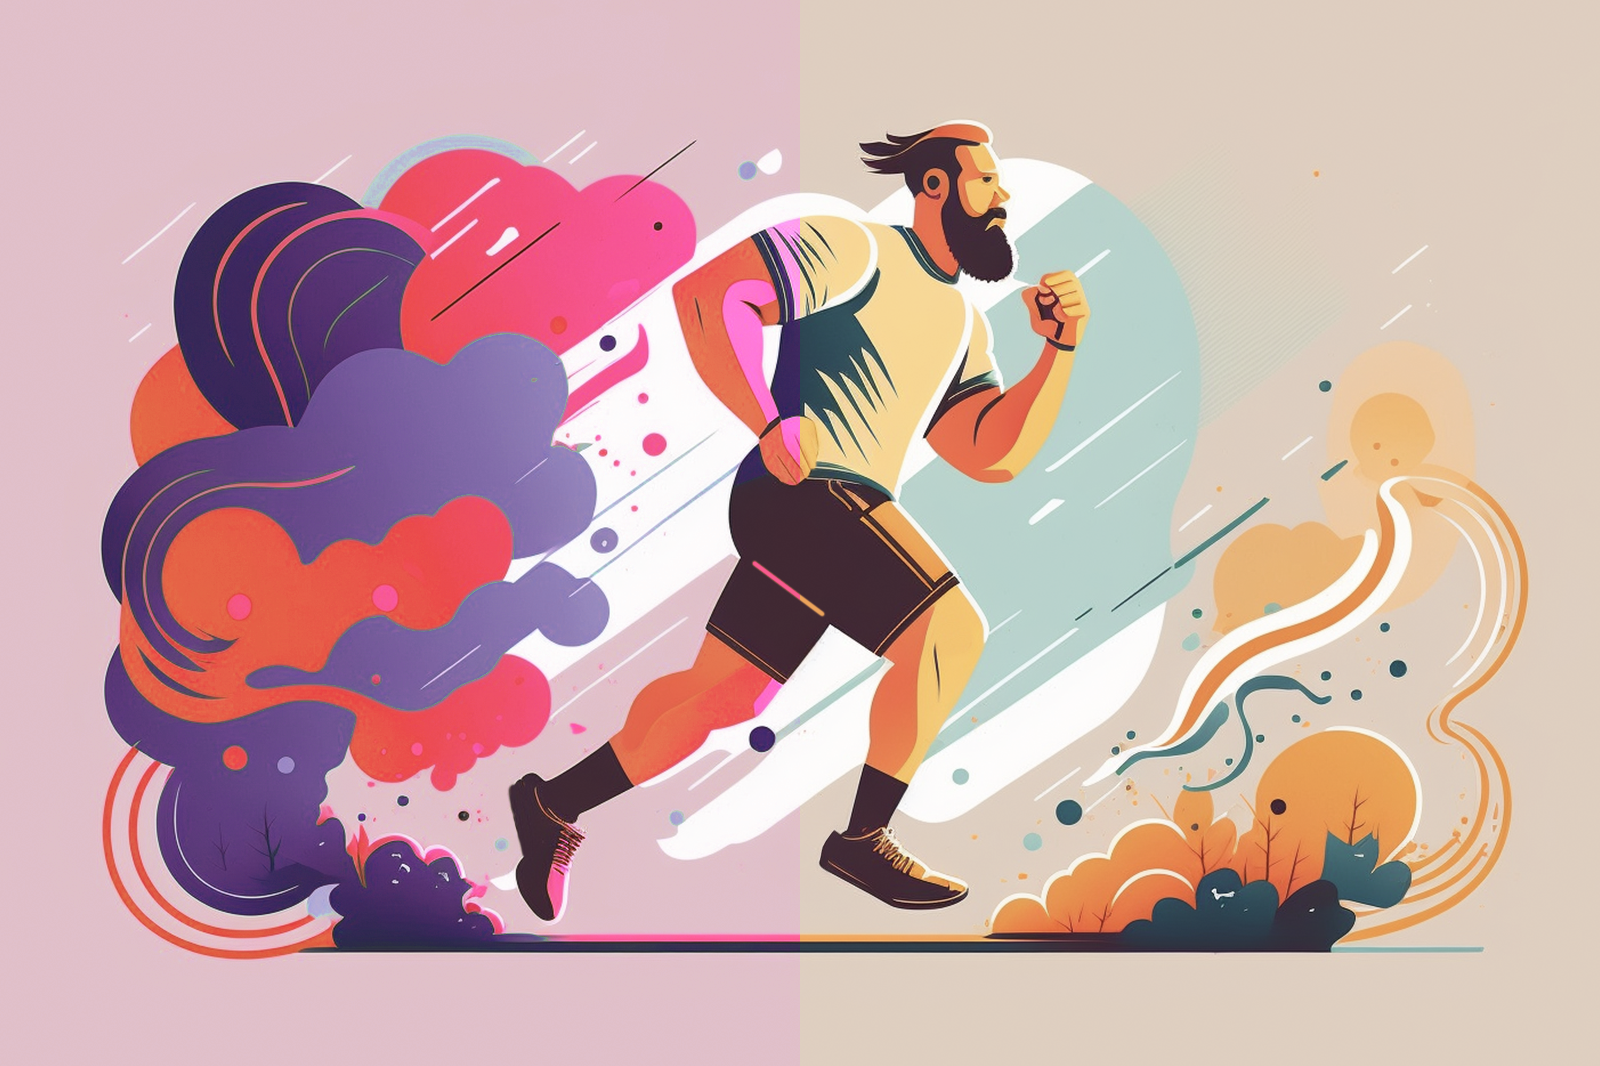 An illustrated man with beard joyfully sprints forward on a vibrant, multicolored background with shades of blue, purple, pink, and orange